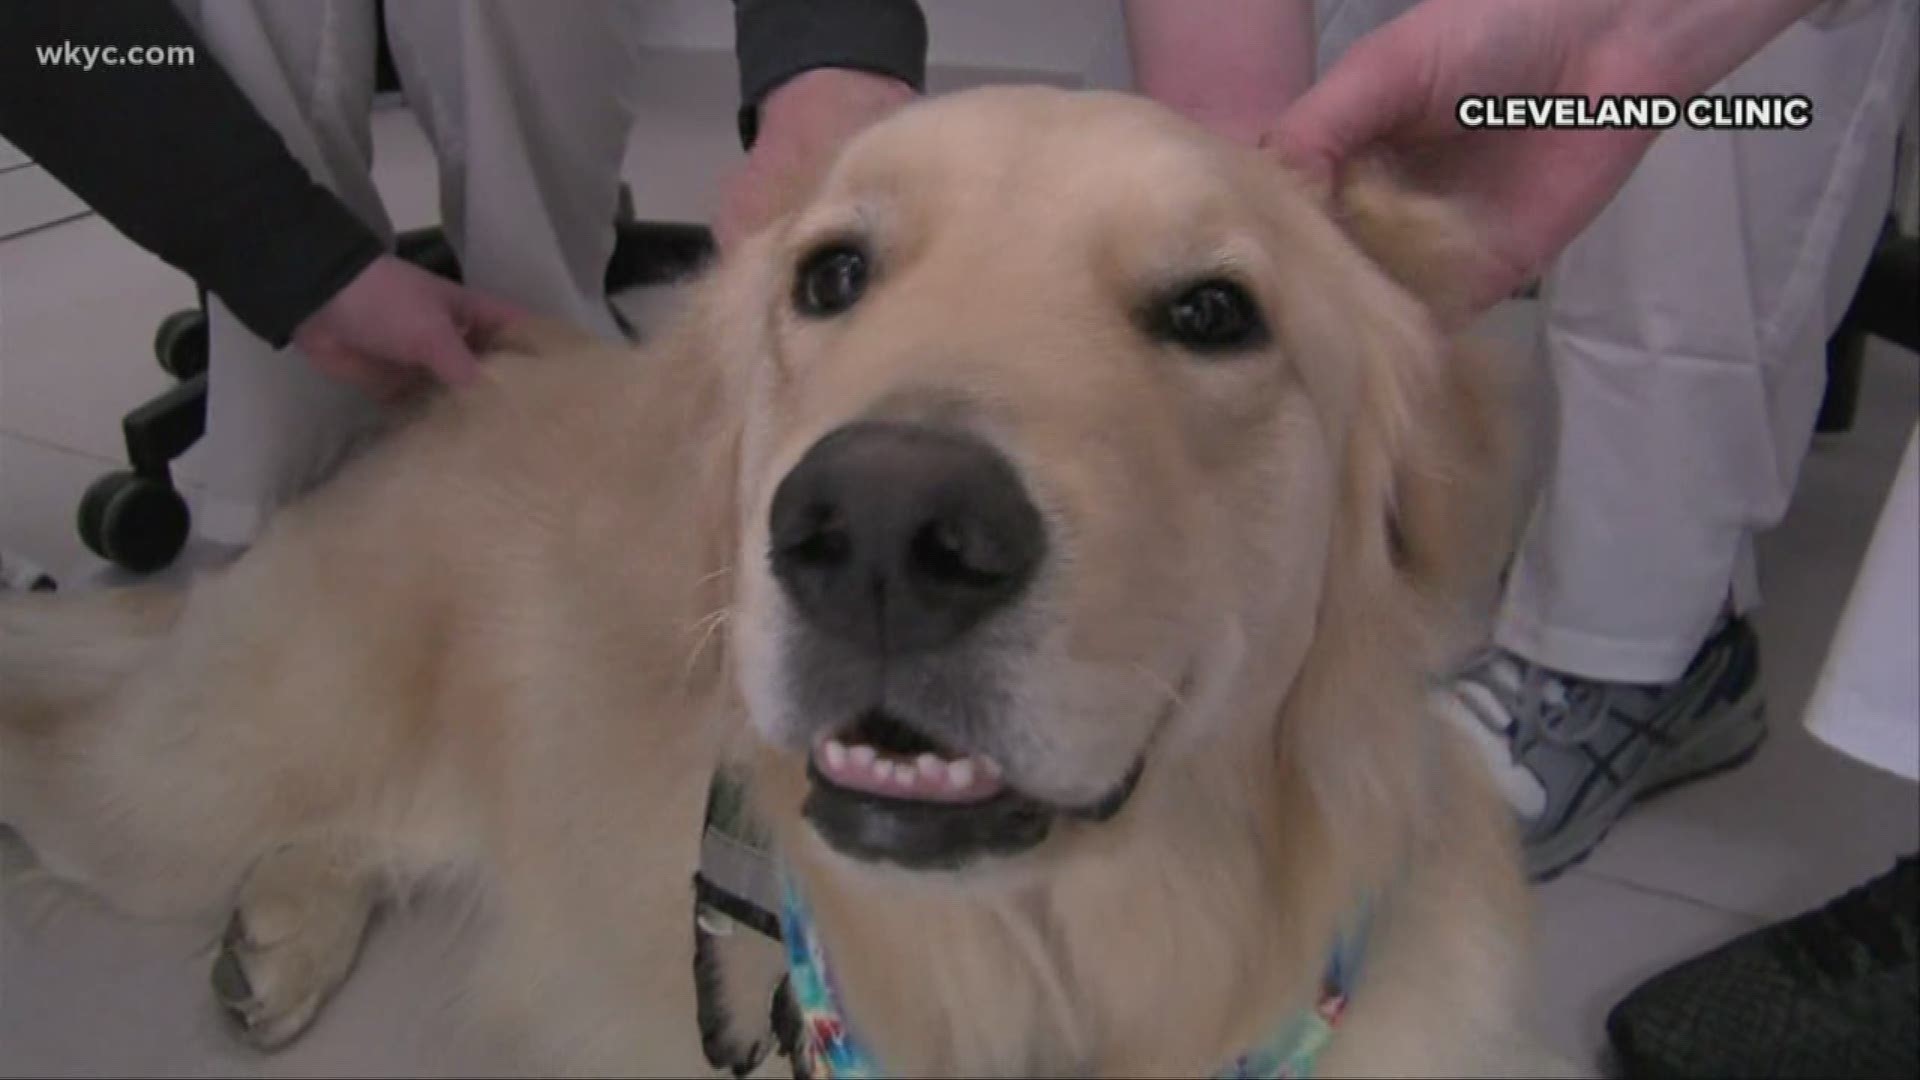 February 3, 2020: Meet Kid. This 2-year-old Golden Retriever is helping put smiles on the faces of patients at Cleveland Clinic Children's every day! Good boy!